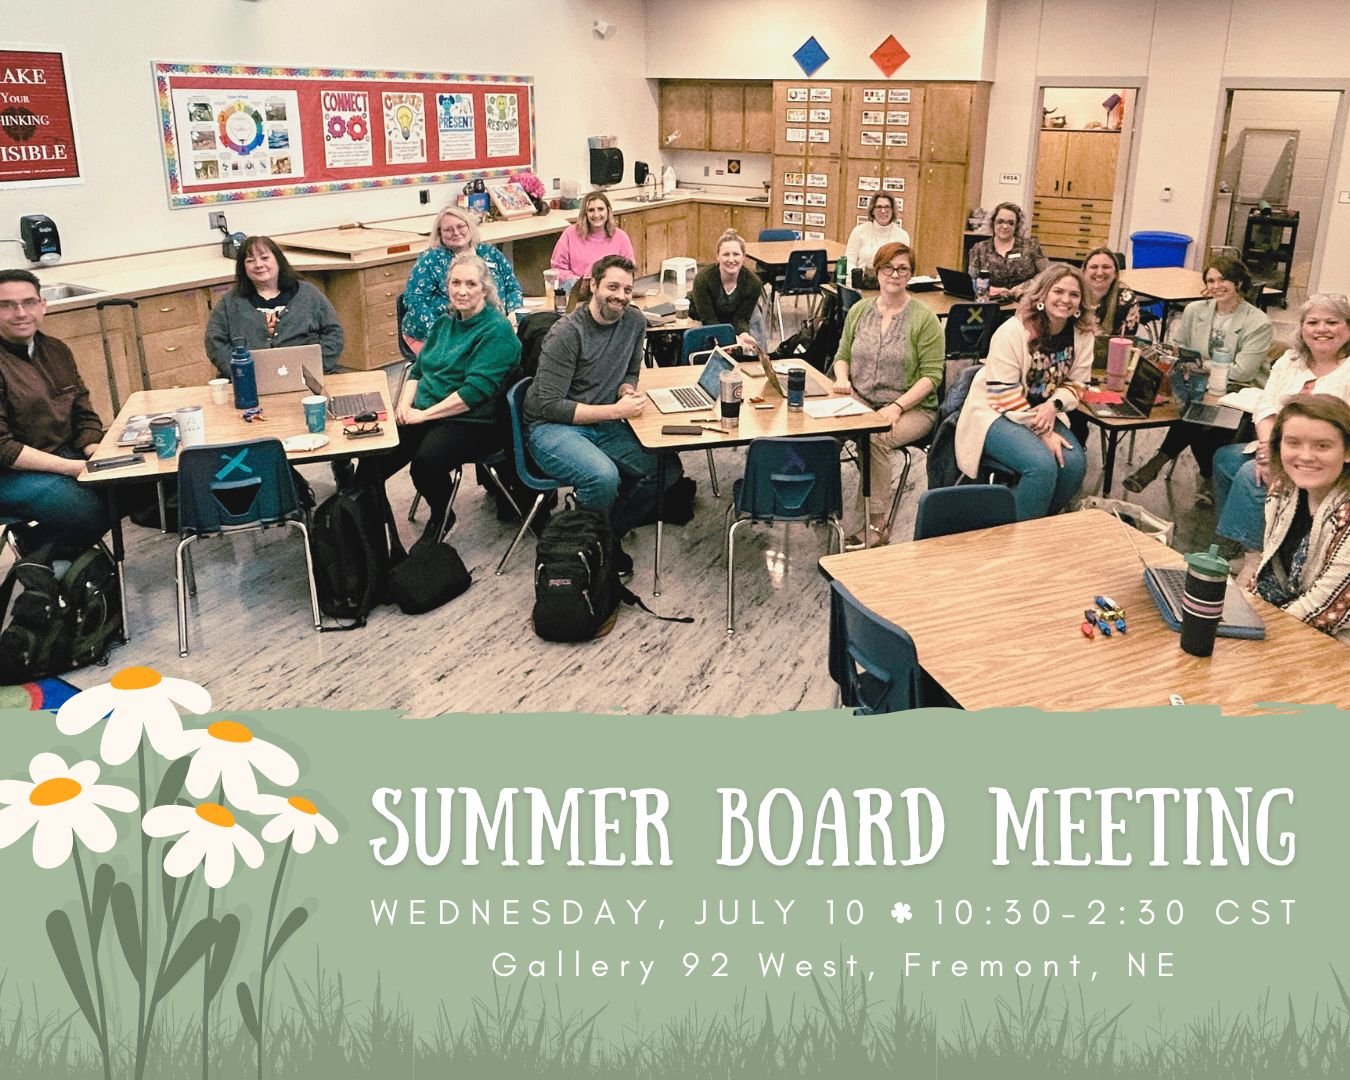 Save the Date! This summer NATA is heading to Fremont for the summer board meeting to explore Gallery 92 West! 

We will be meeting in the Barbara Tellatin Gallery 10:30am cst- 2:30pm cst and can&rsquo;t wait to welcome in the NEW executive board- th